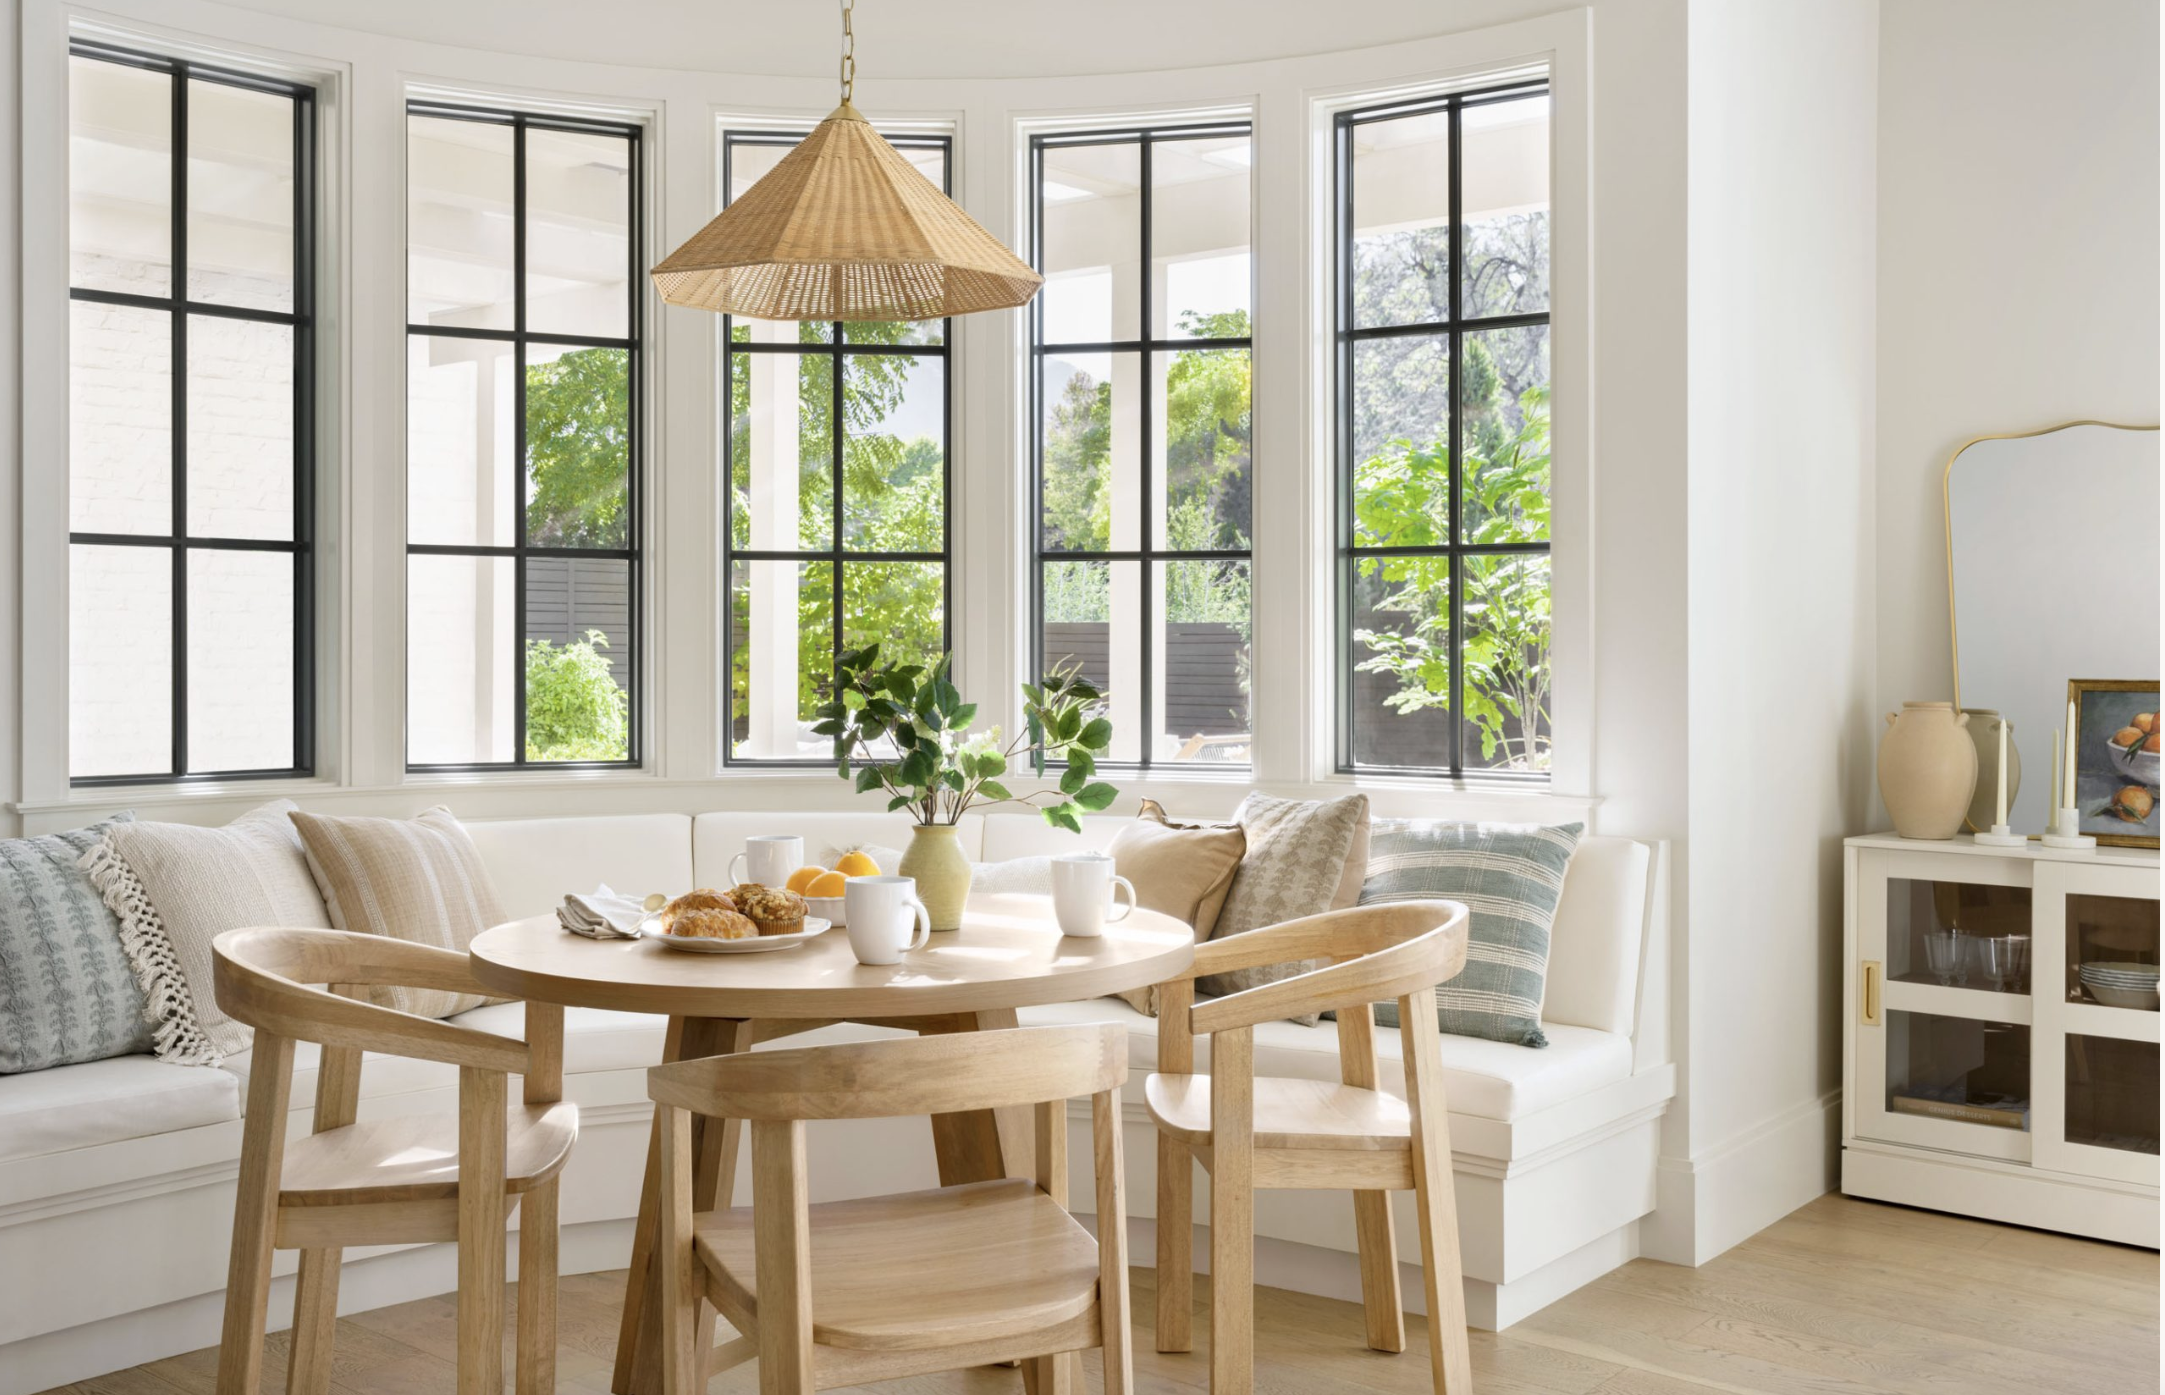 Breakfast nook from studio McGee is the perfect example of the ideal breakfast nook